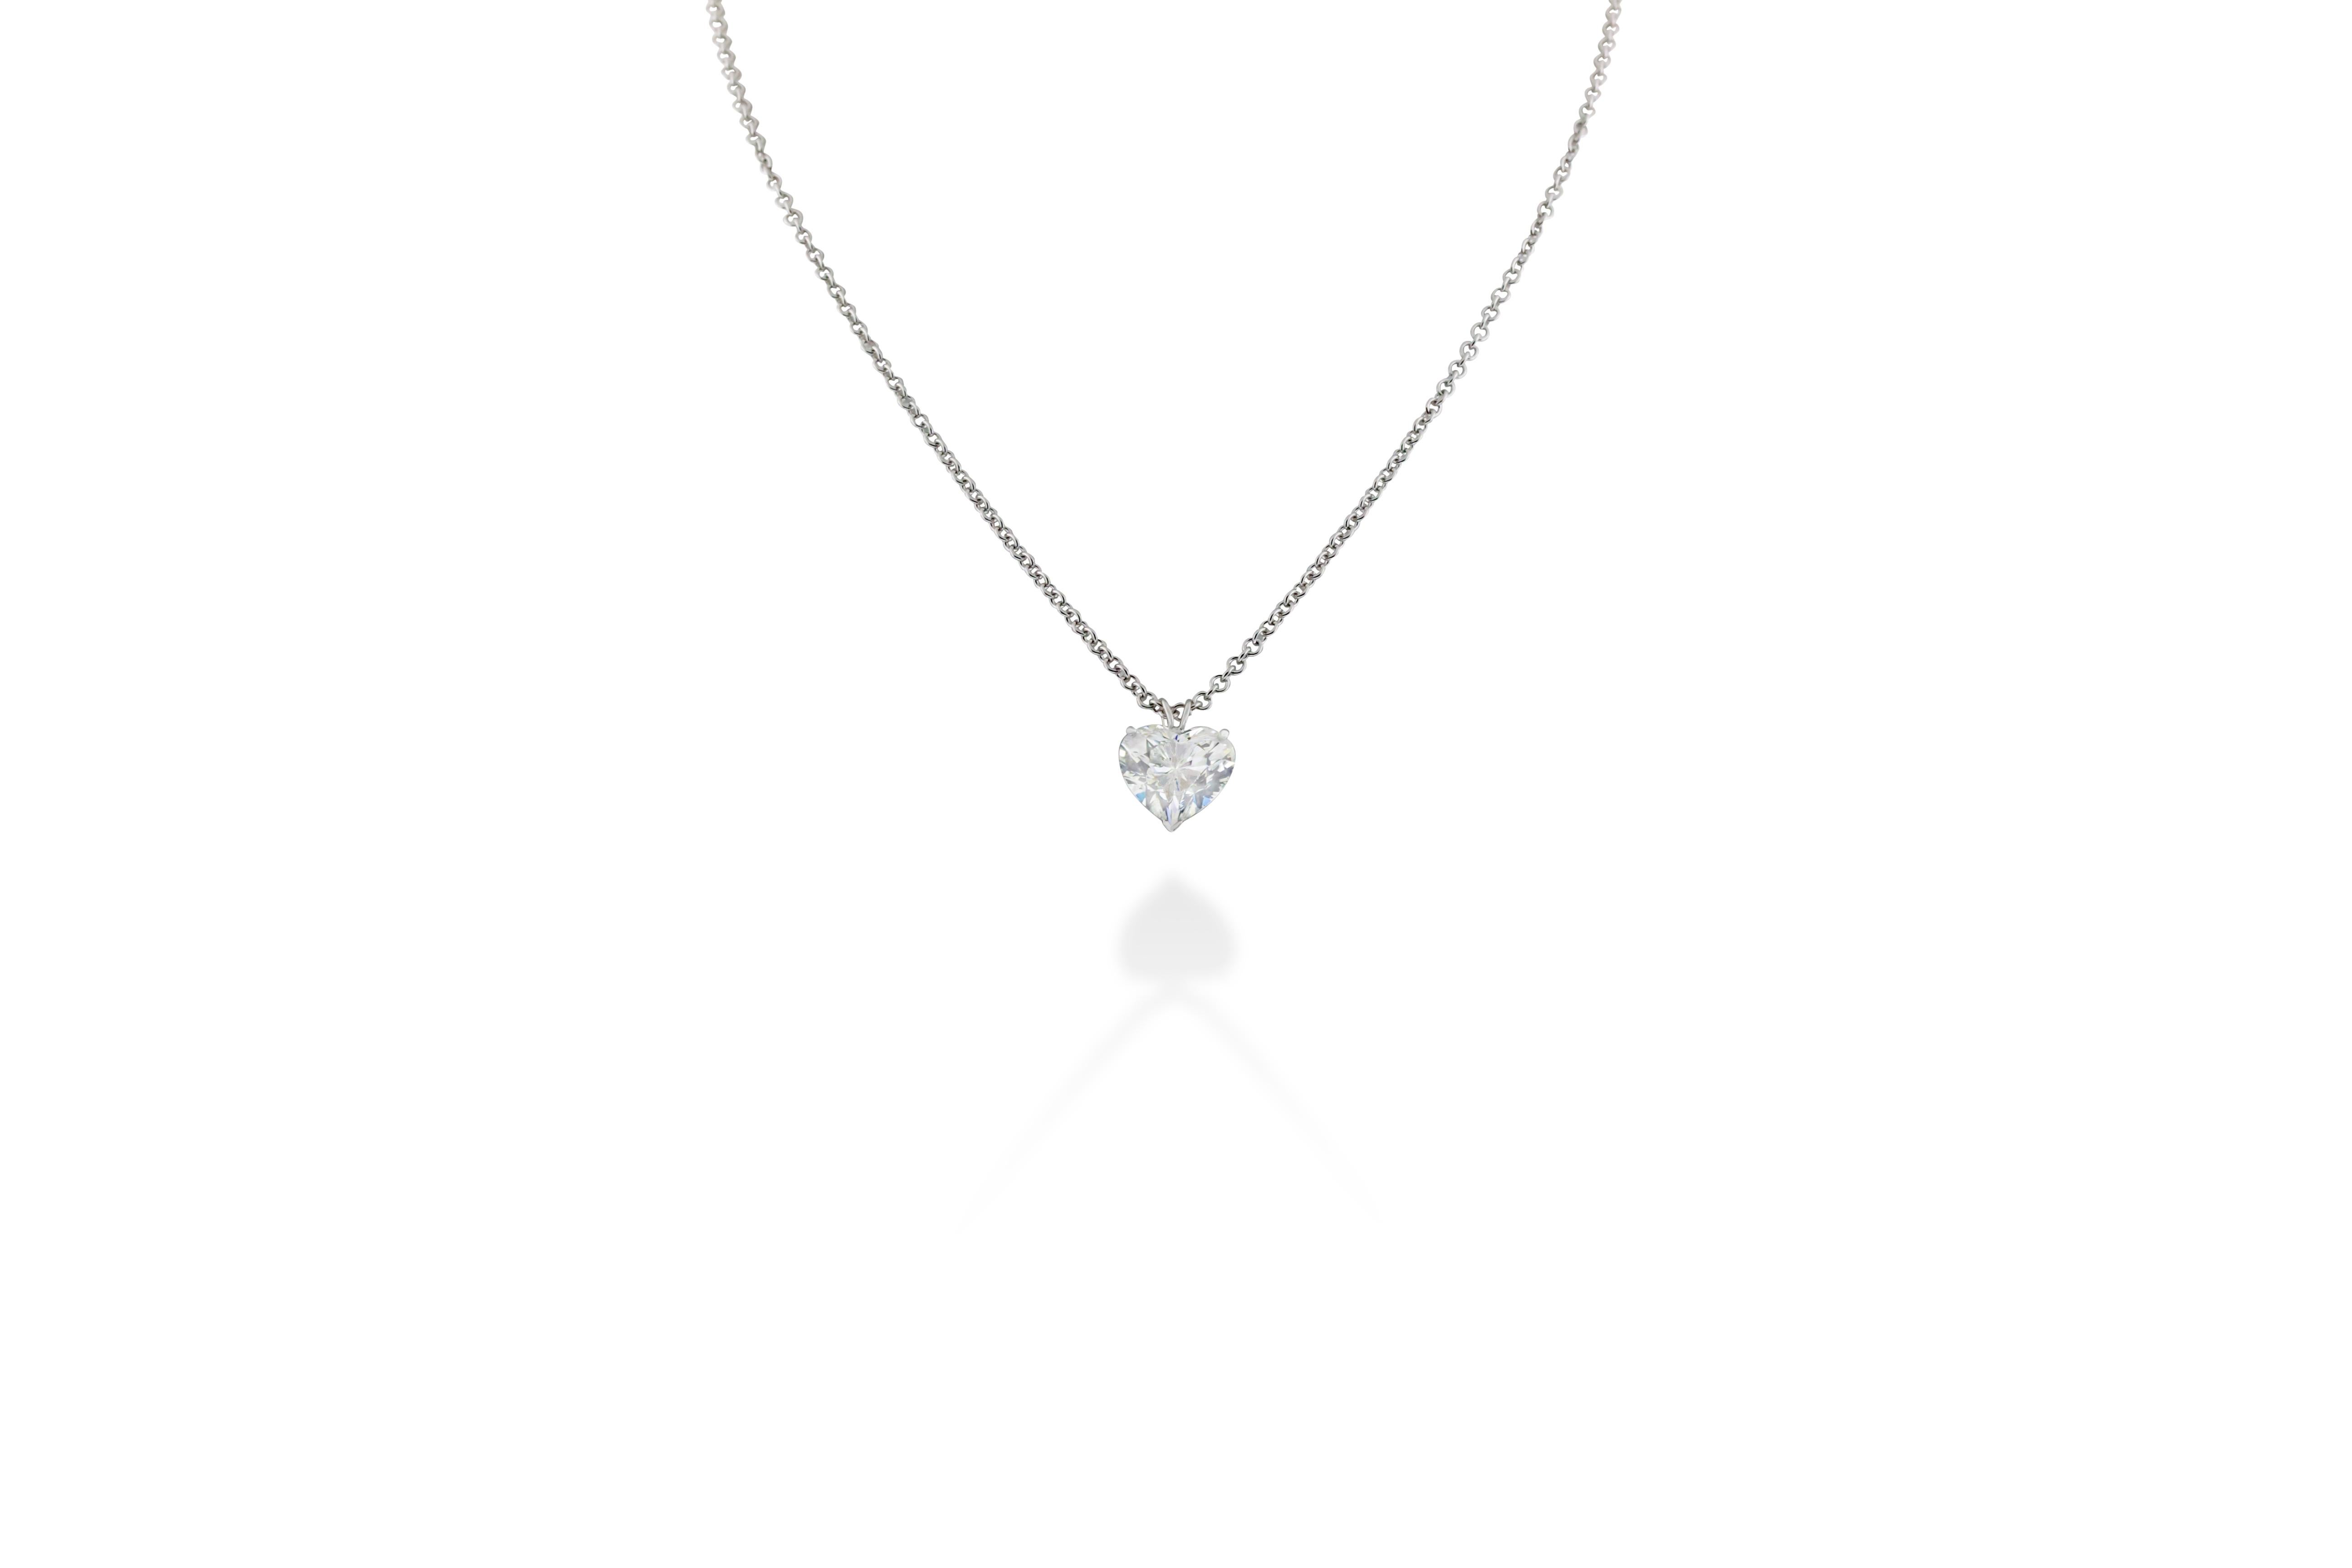 5.01 carat H VS2 diamond heart shape solitaire necklace on a fine 14K gold chain with a total weight of 14.6g. Chain drop is 8 in. Set in 18k and 14k white gold. GIA Certified. Certificate No. 1139995781. 


Viewings available in our NYC showroom by